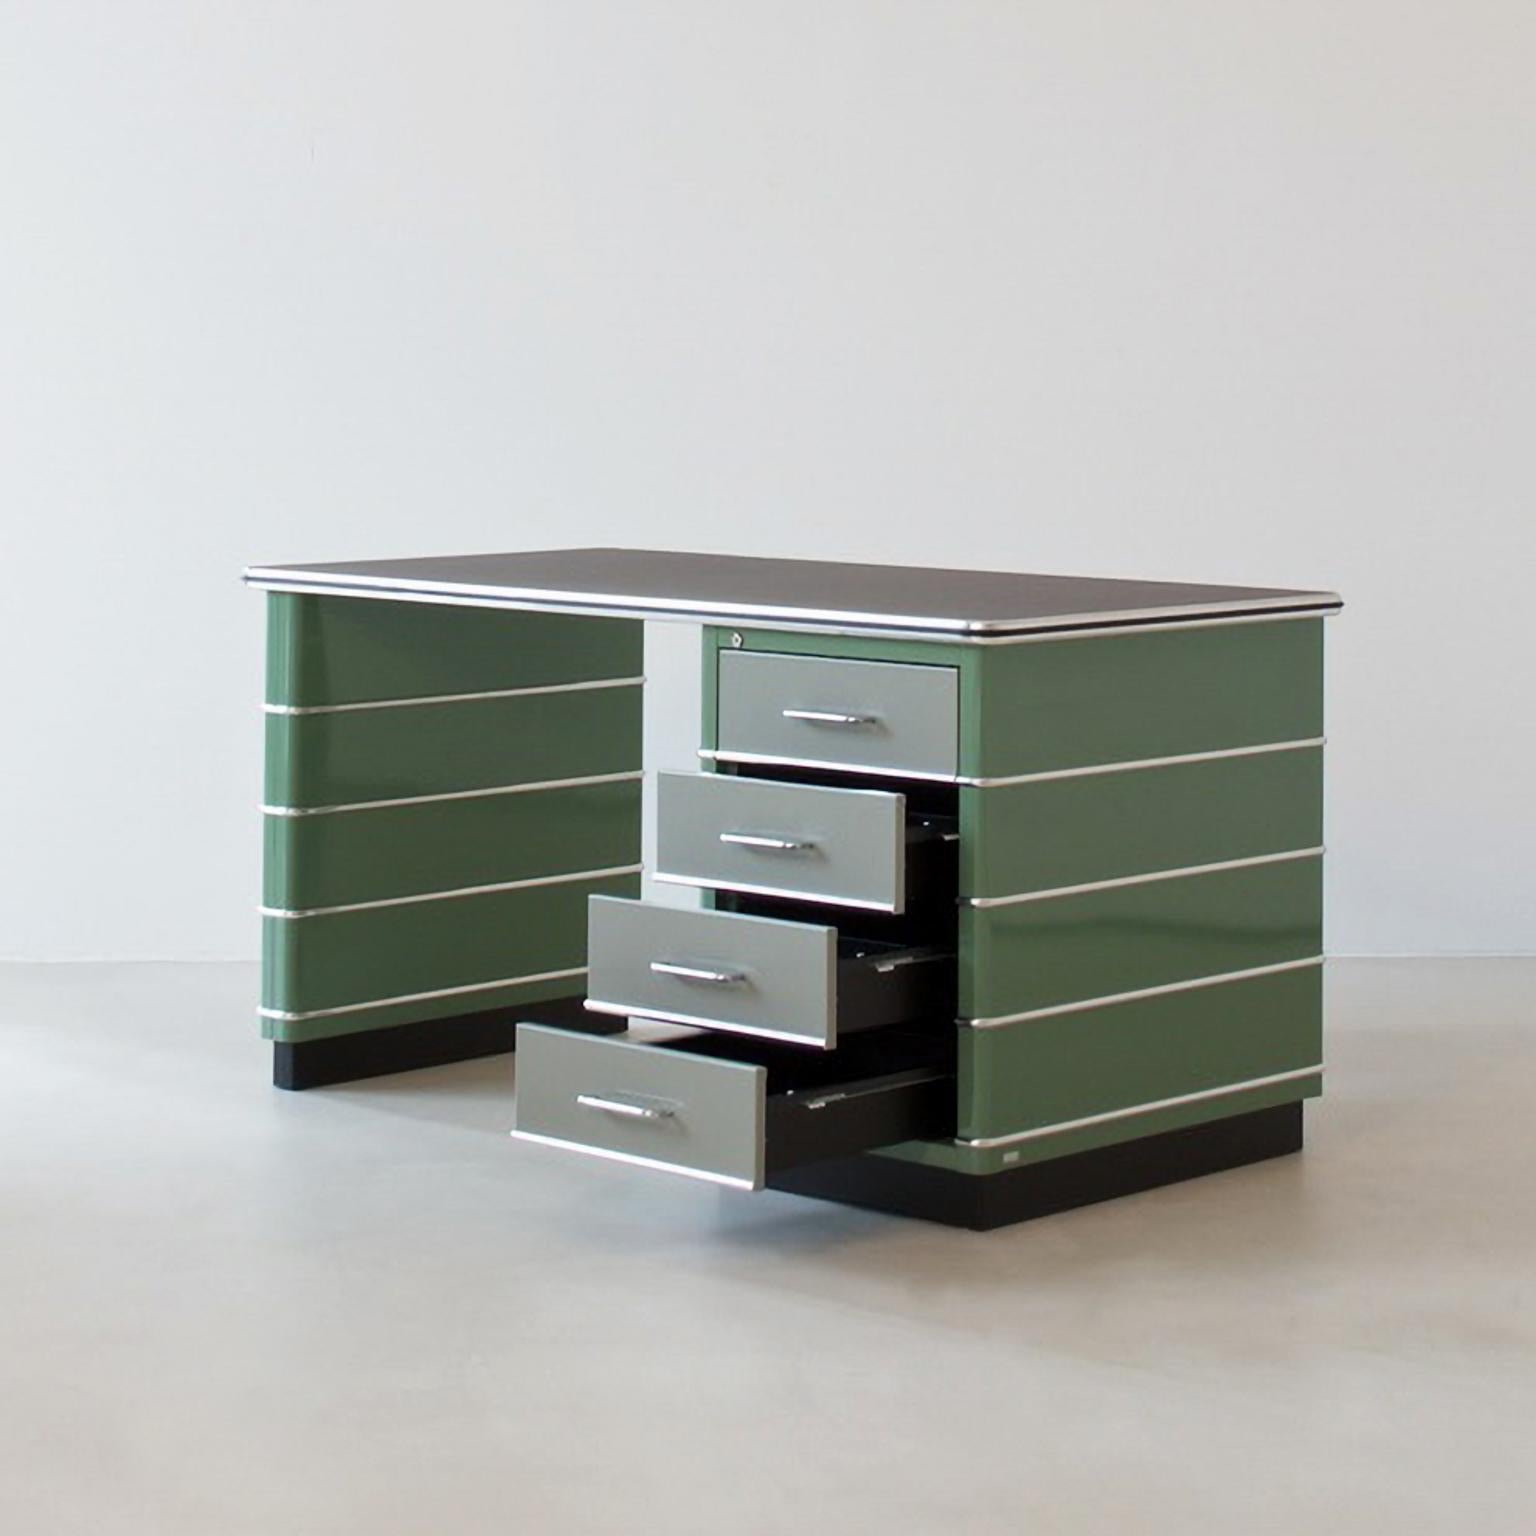 Contemporary Made to Measure Metal Desk, Lacquered Metal, Industrial Design, Germany, 2018 For Sale